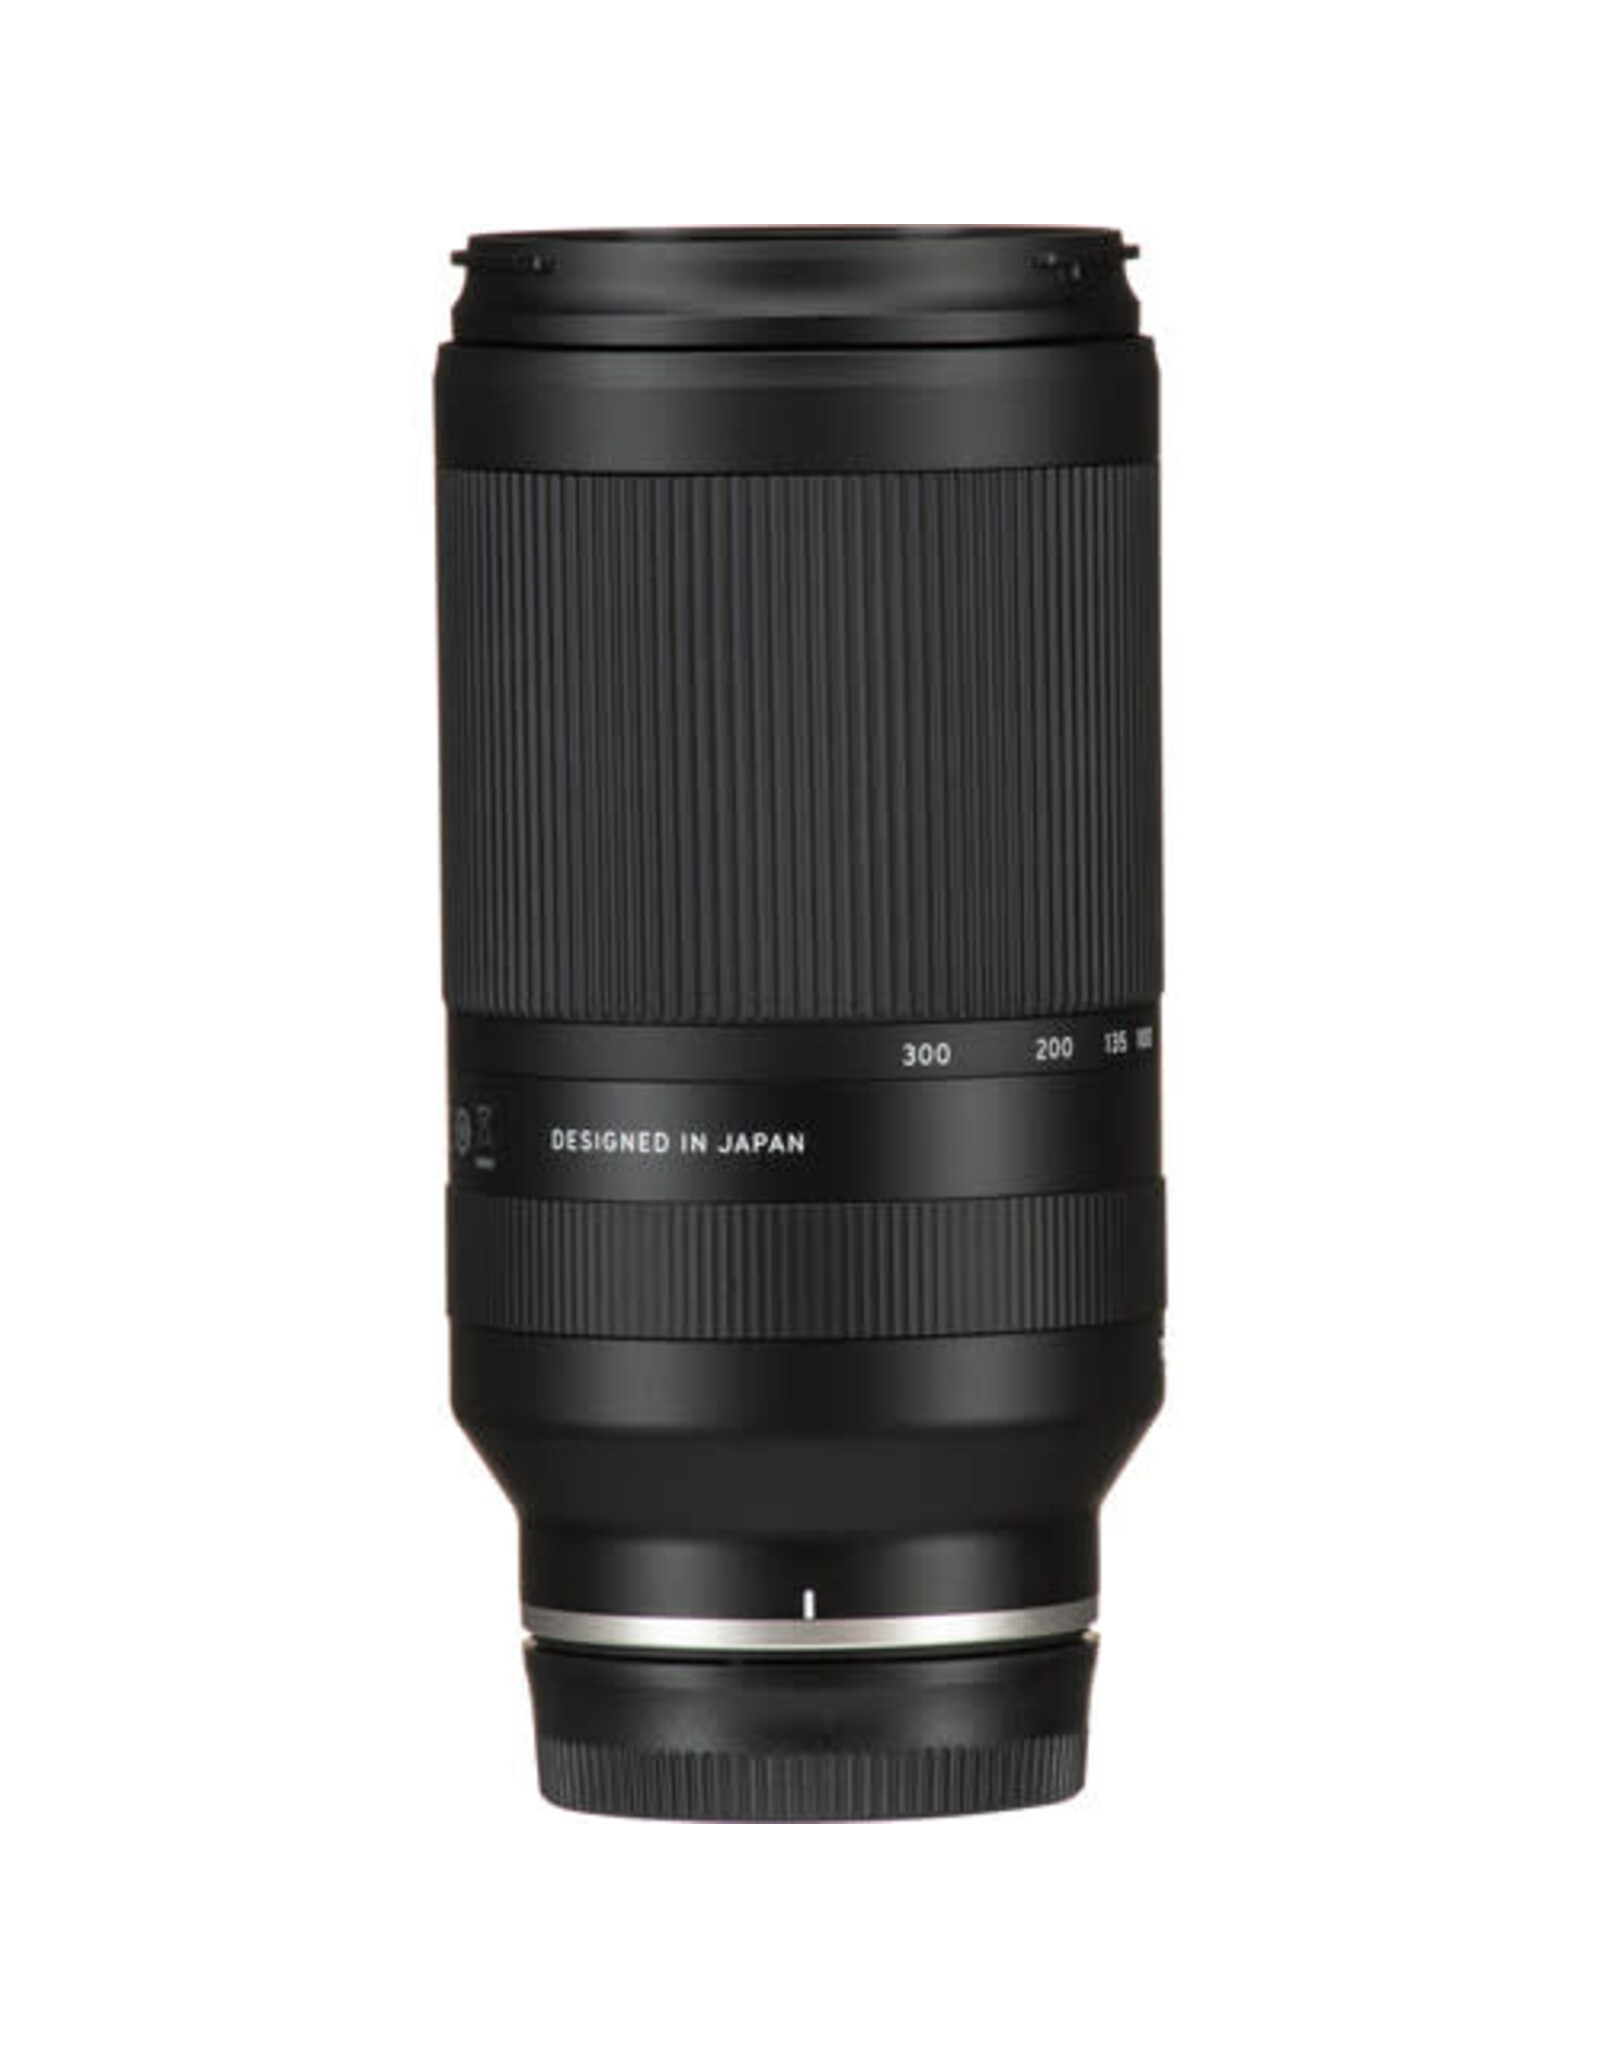 Tamron Tamron AF 70-300mm f/4.5-6.3 Di III RXD Lens for Sony